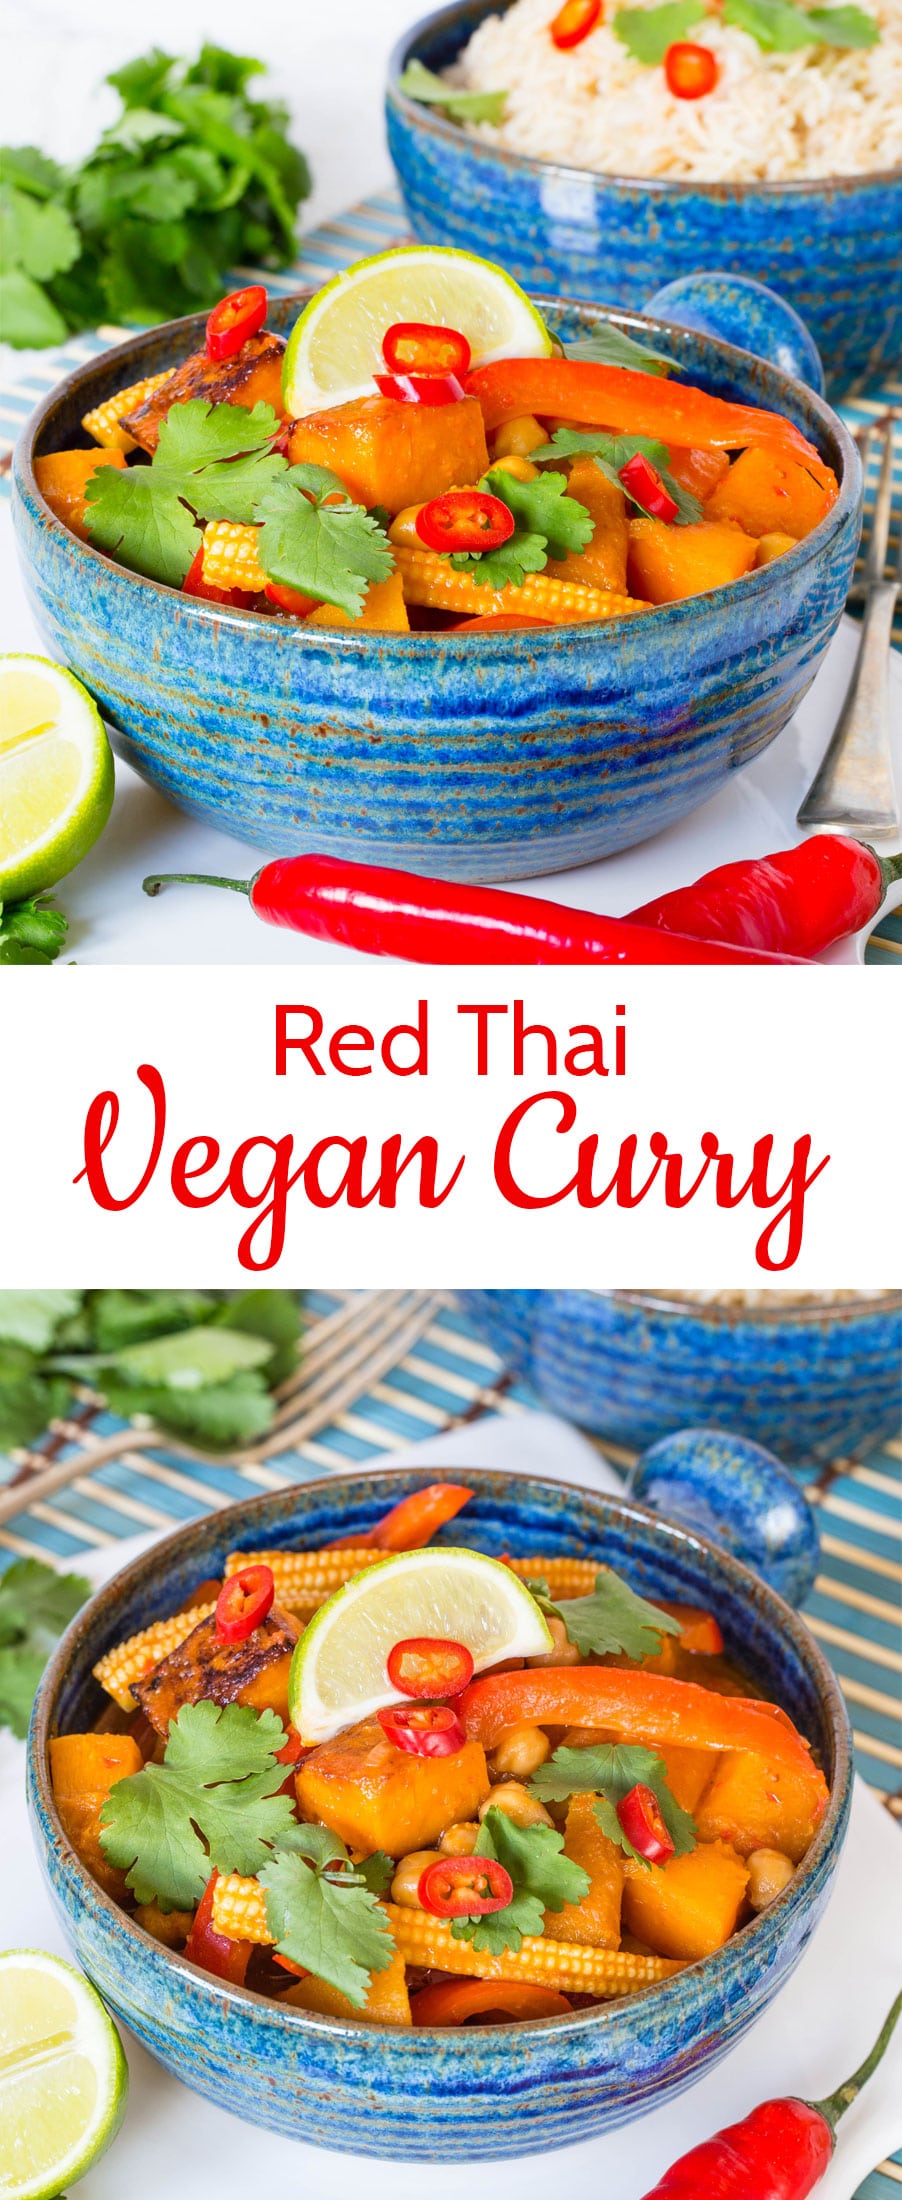 Make your own quick and easy vegan red Thai curry paste and cook this delicious version in next to no time.  Prep ahead cooking at its best. Make as fiery or as mild as you like.